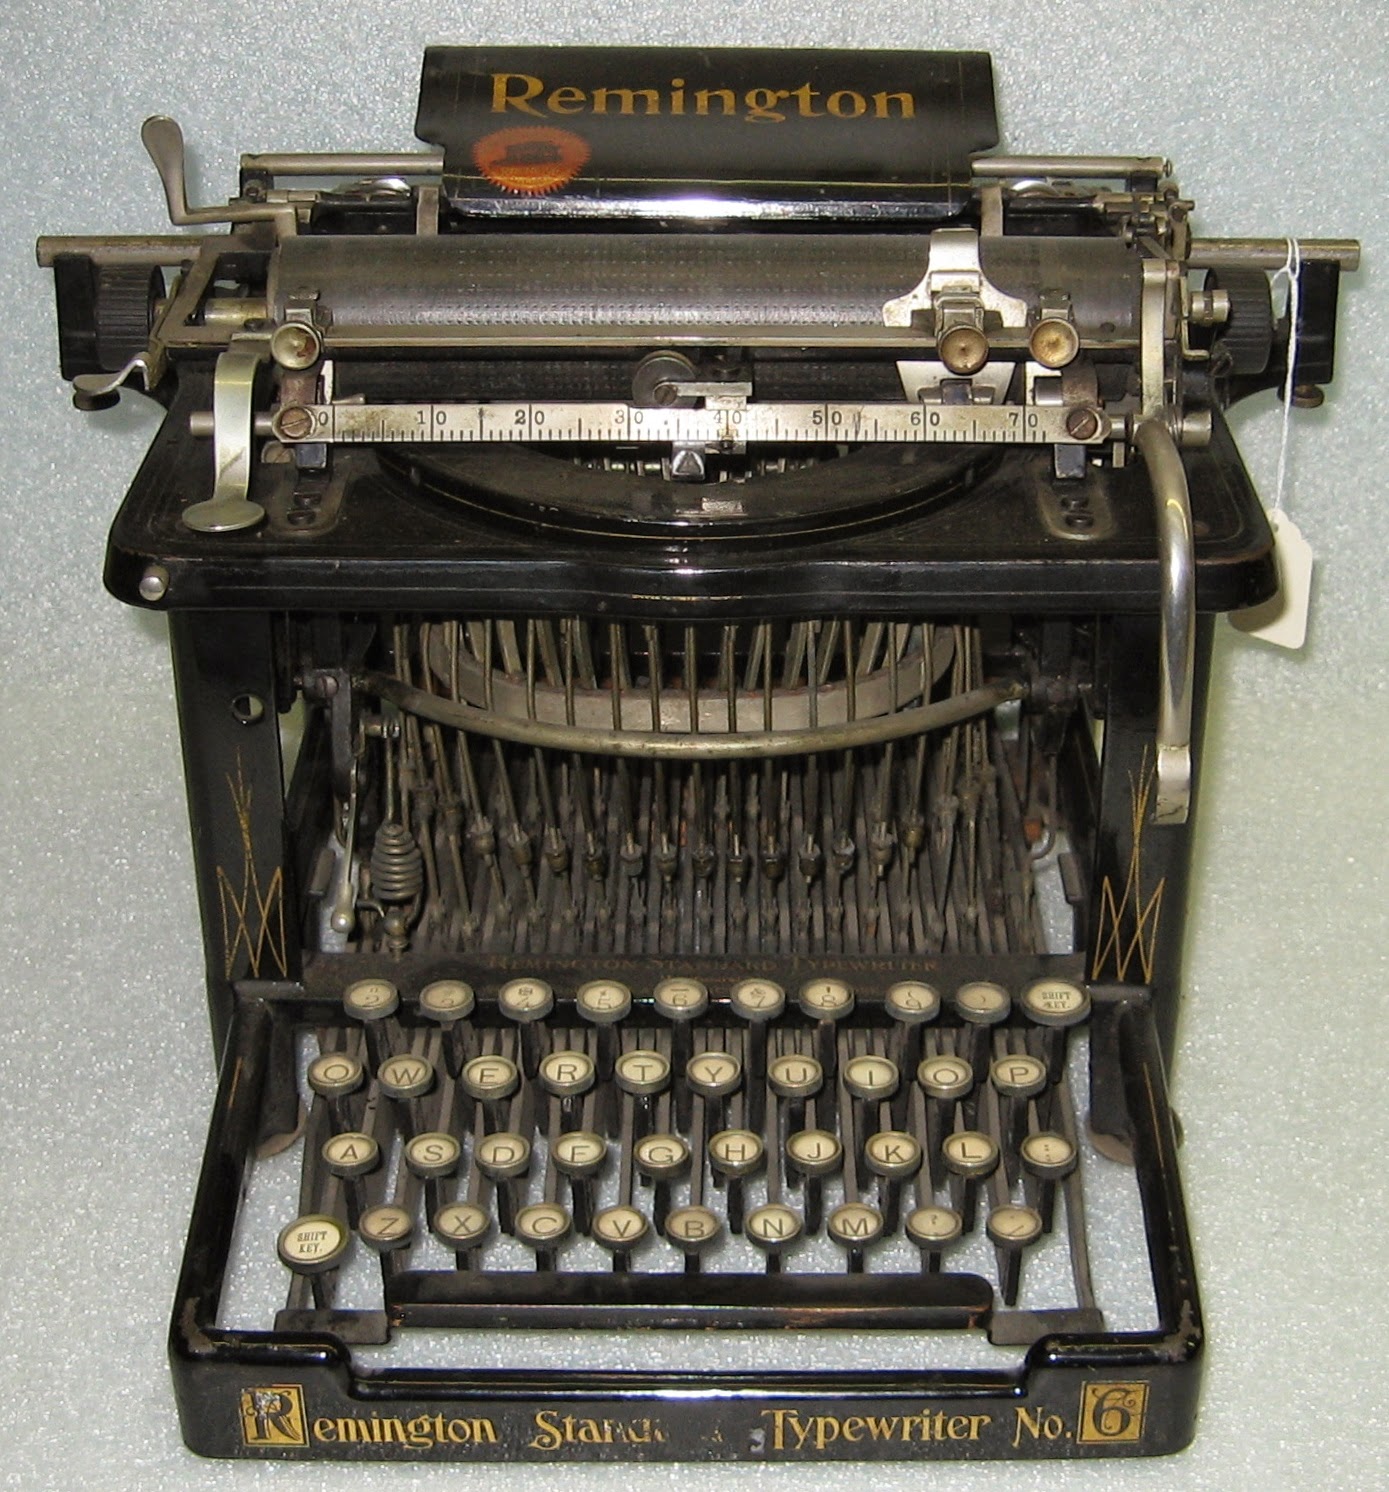 Chemung County Historical Society: Remington Typewriters: "To Save Time